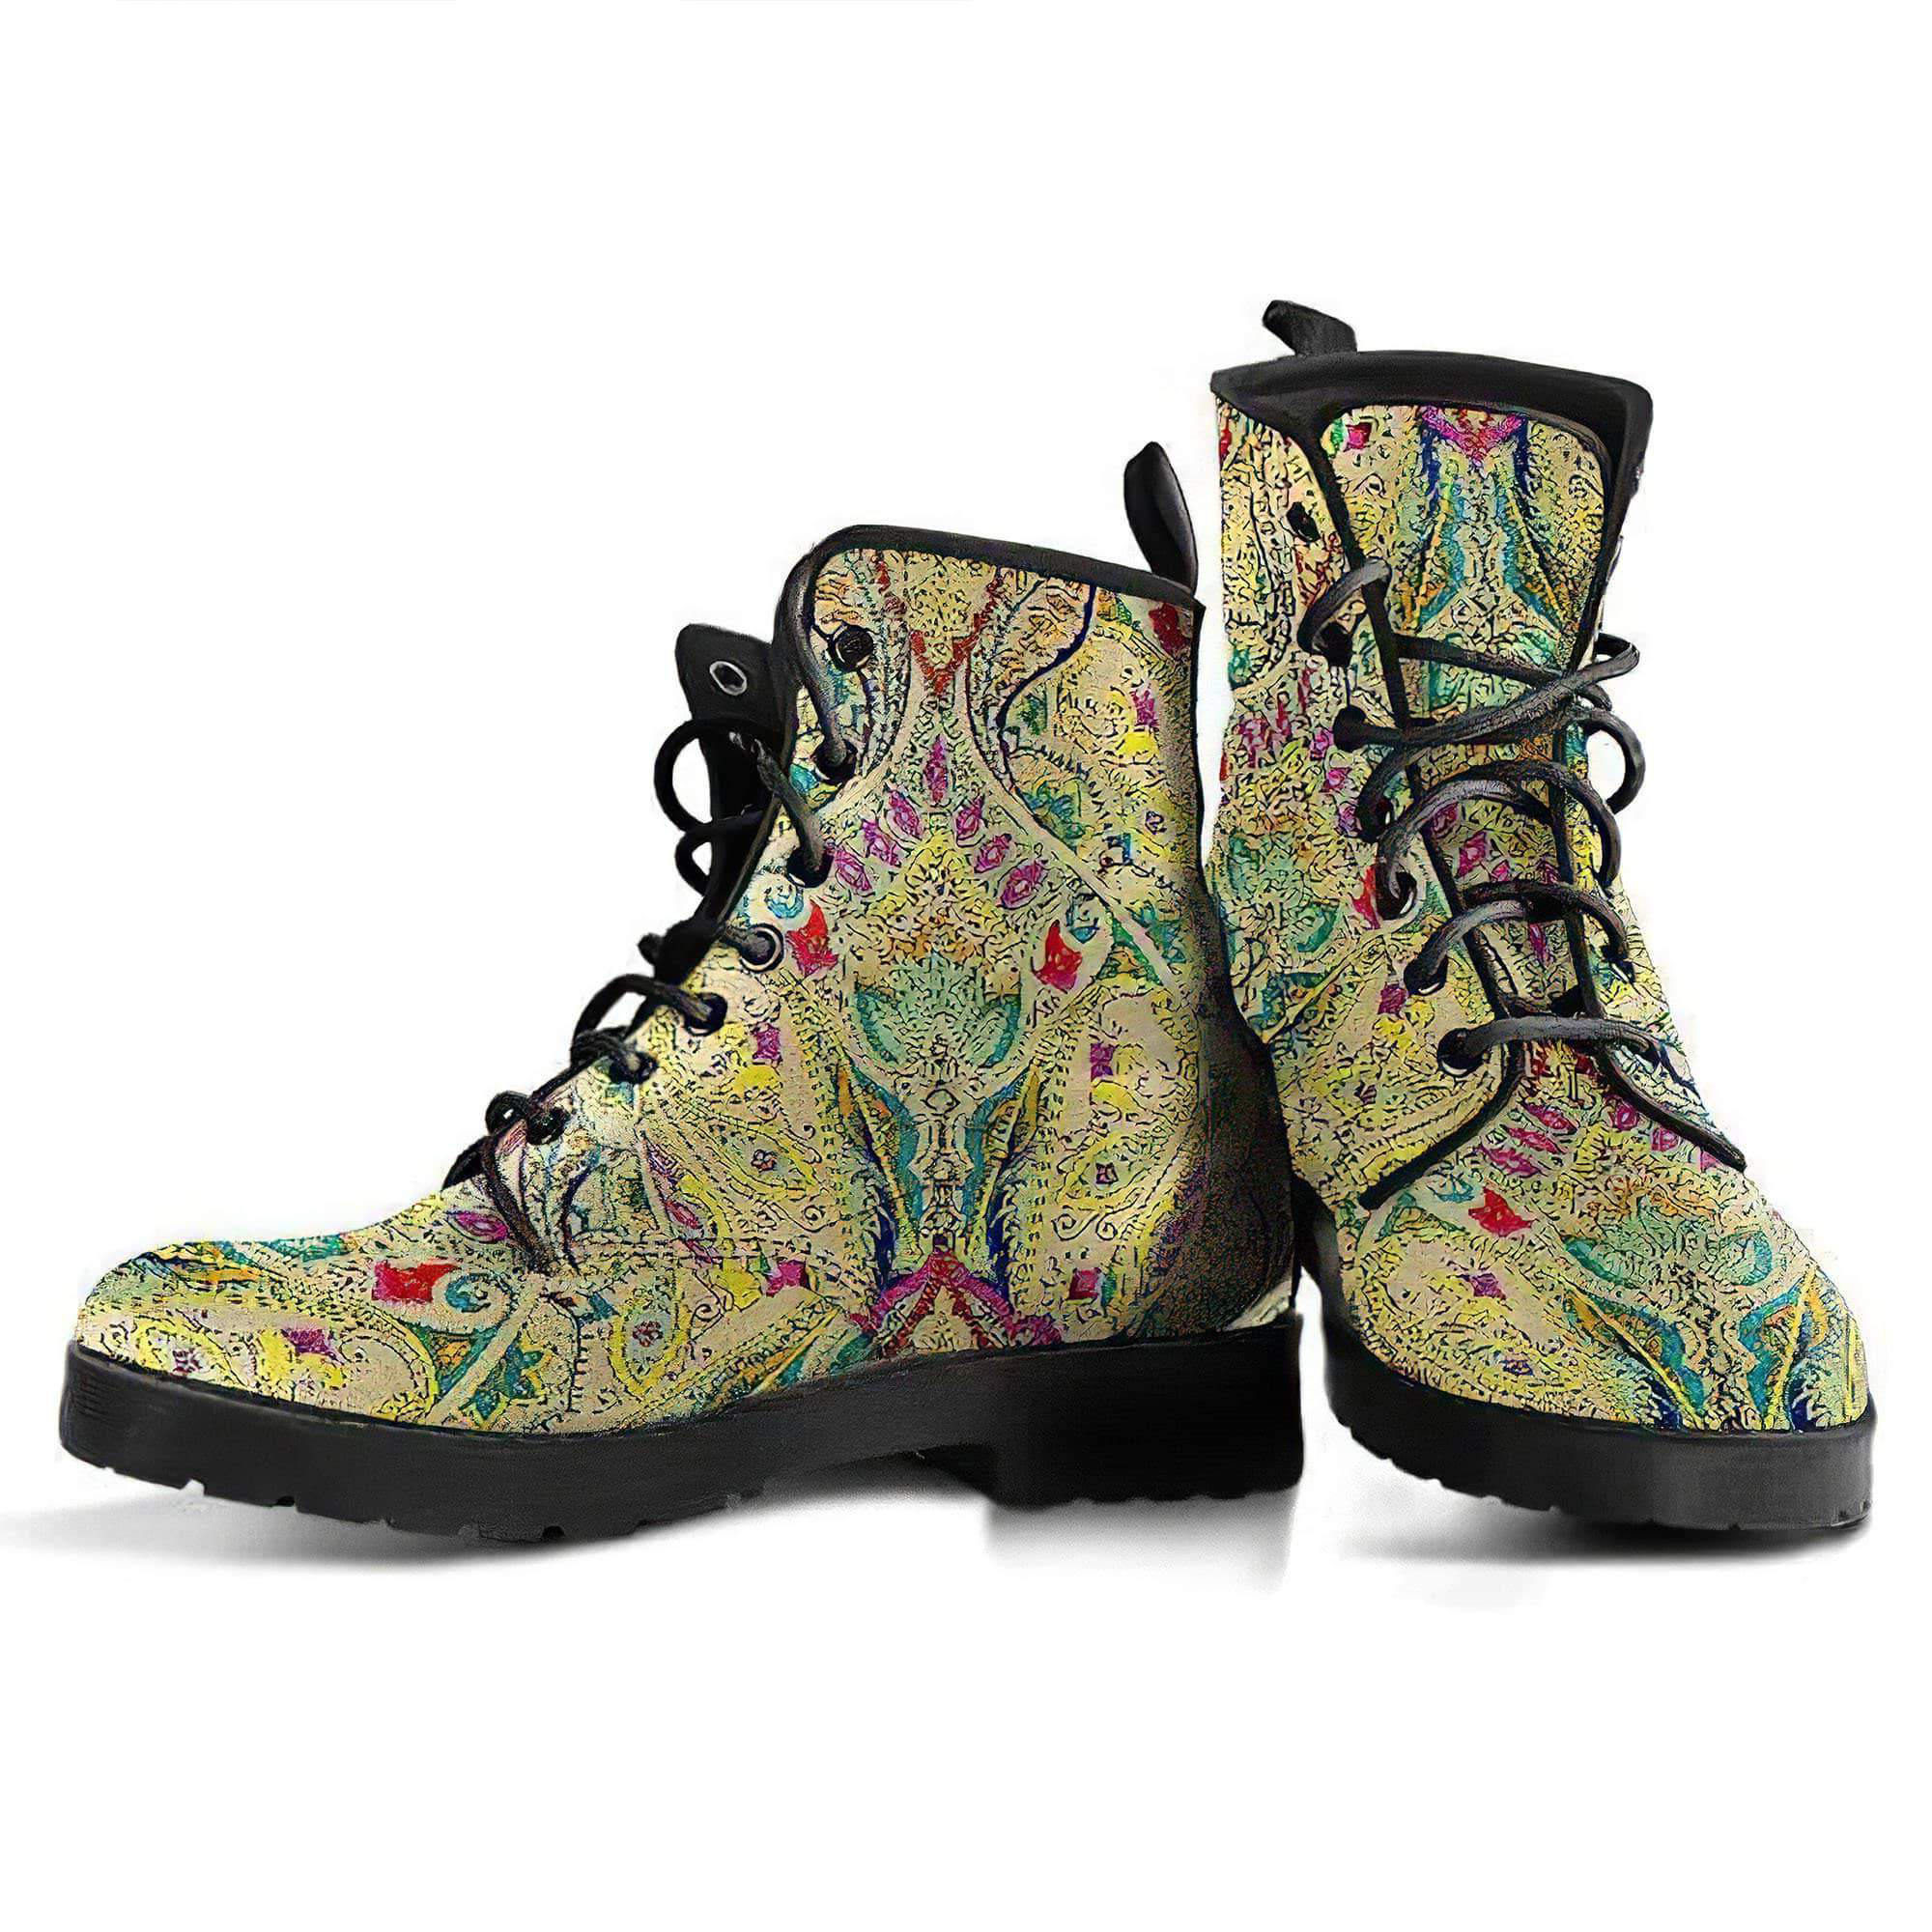 vintage-paisley-handcrafted-boots-women-s-leather-boots-12051972718653.jpg